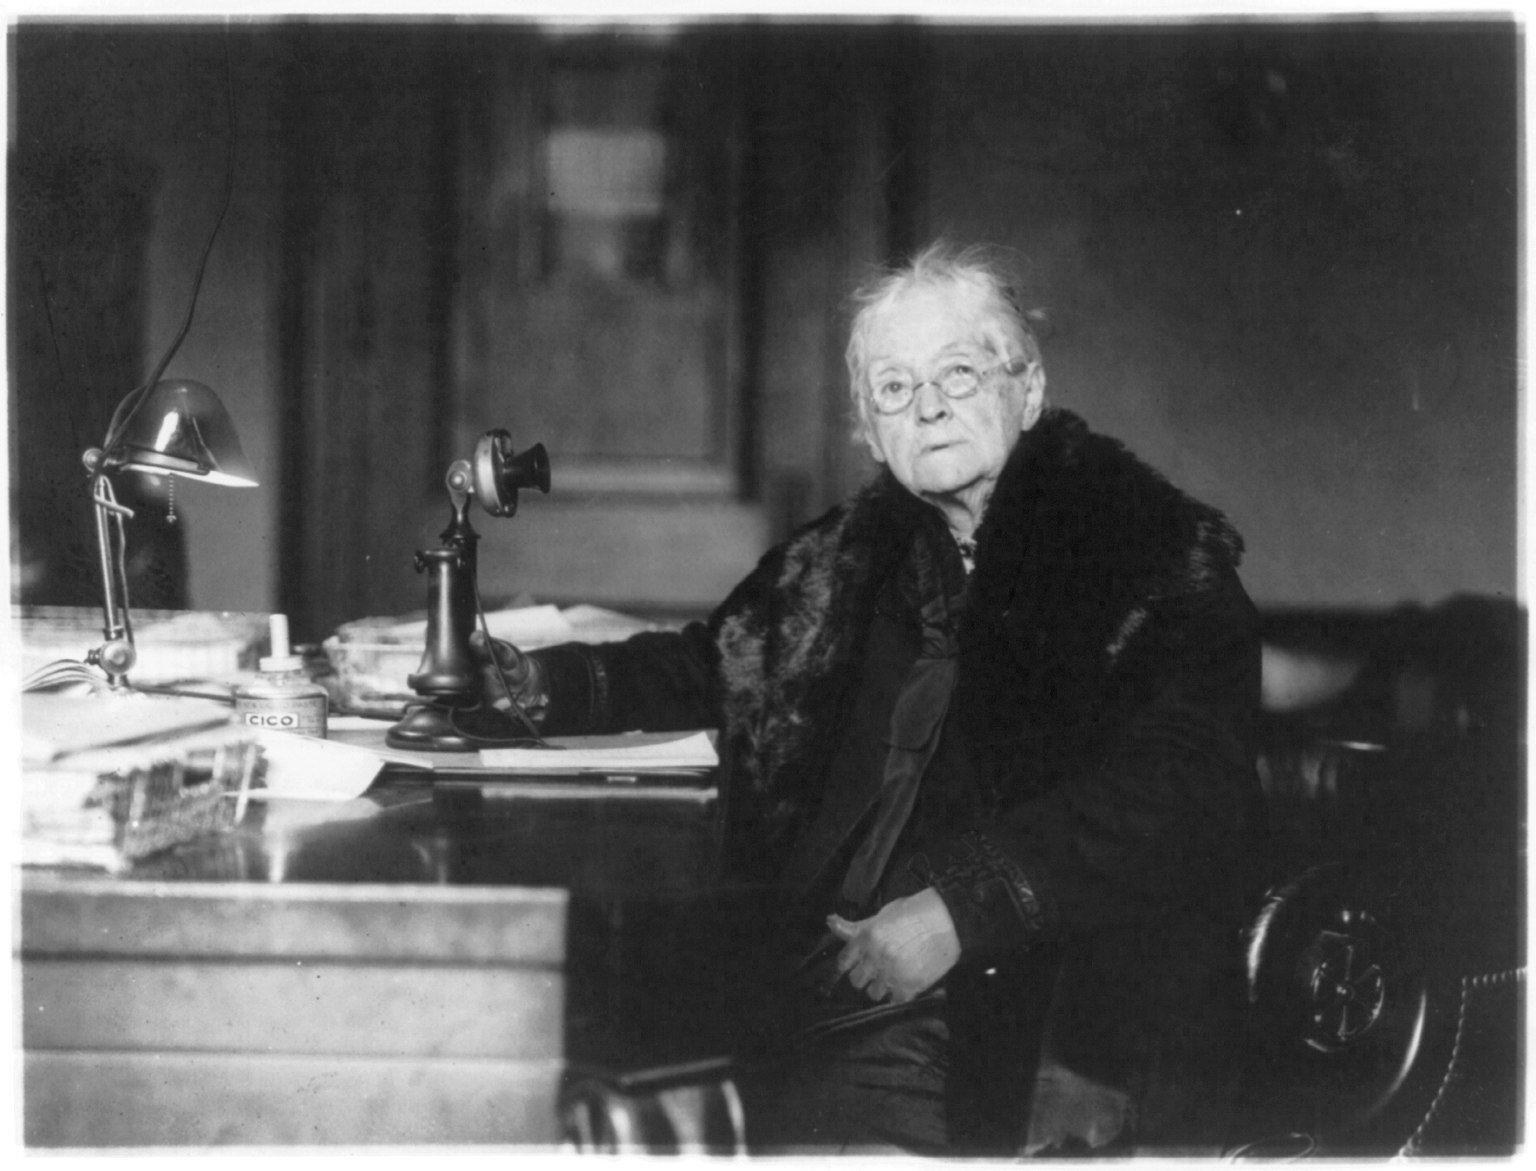 <p><a href="https://www.senate.gov/senators/FeaturedBios/Featured_Bio_Felton.htm">Rebecca Latimer Felton</a> of Georgia was the first female United States senator. On October 3, 1922, Felton (age 87) was appointed to fill a vacancy. During her long career, Felton worked in politics and journalism and fought for women’s suffrage and equality. A stain on her record, she was also an “outspoken white supremacist and advocate of segregation.”</p>